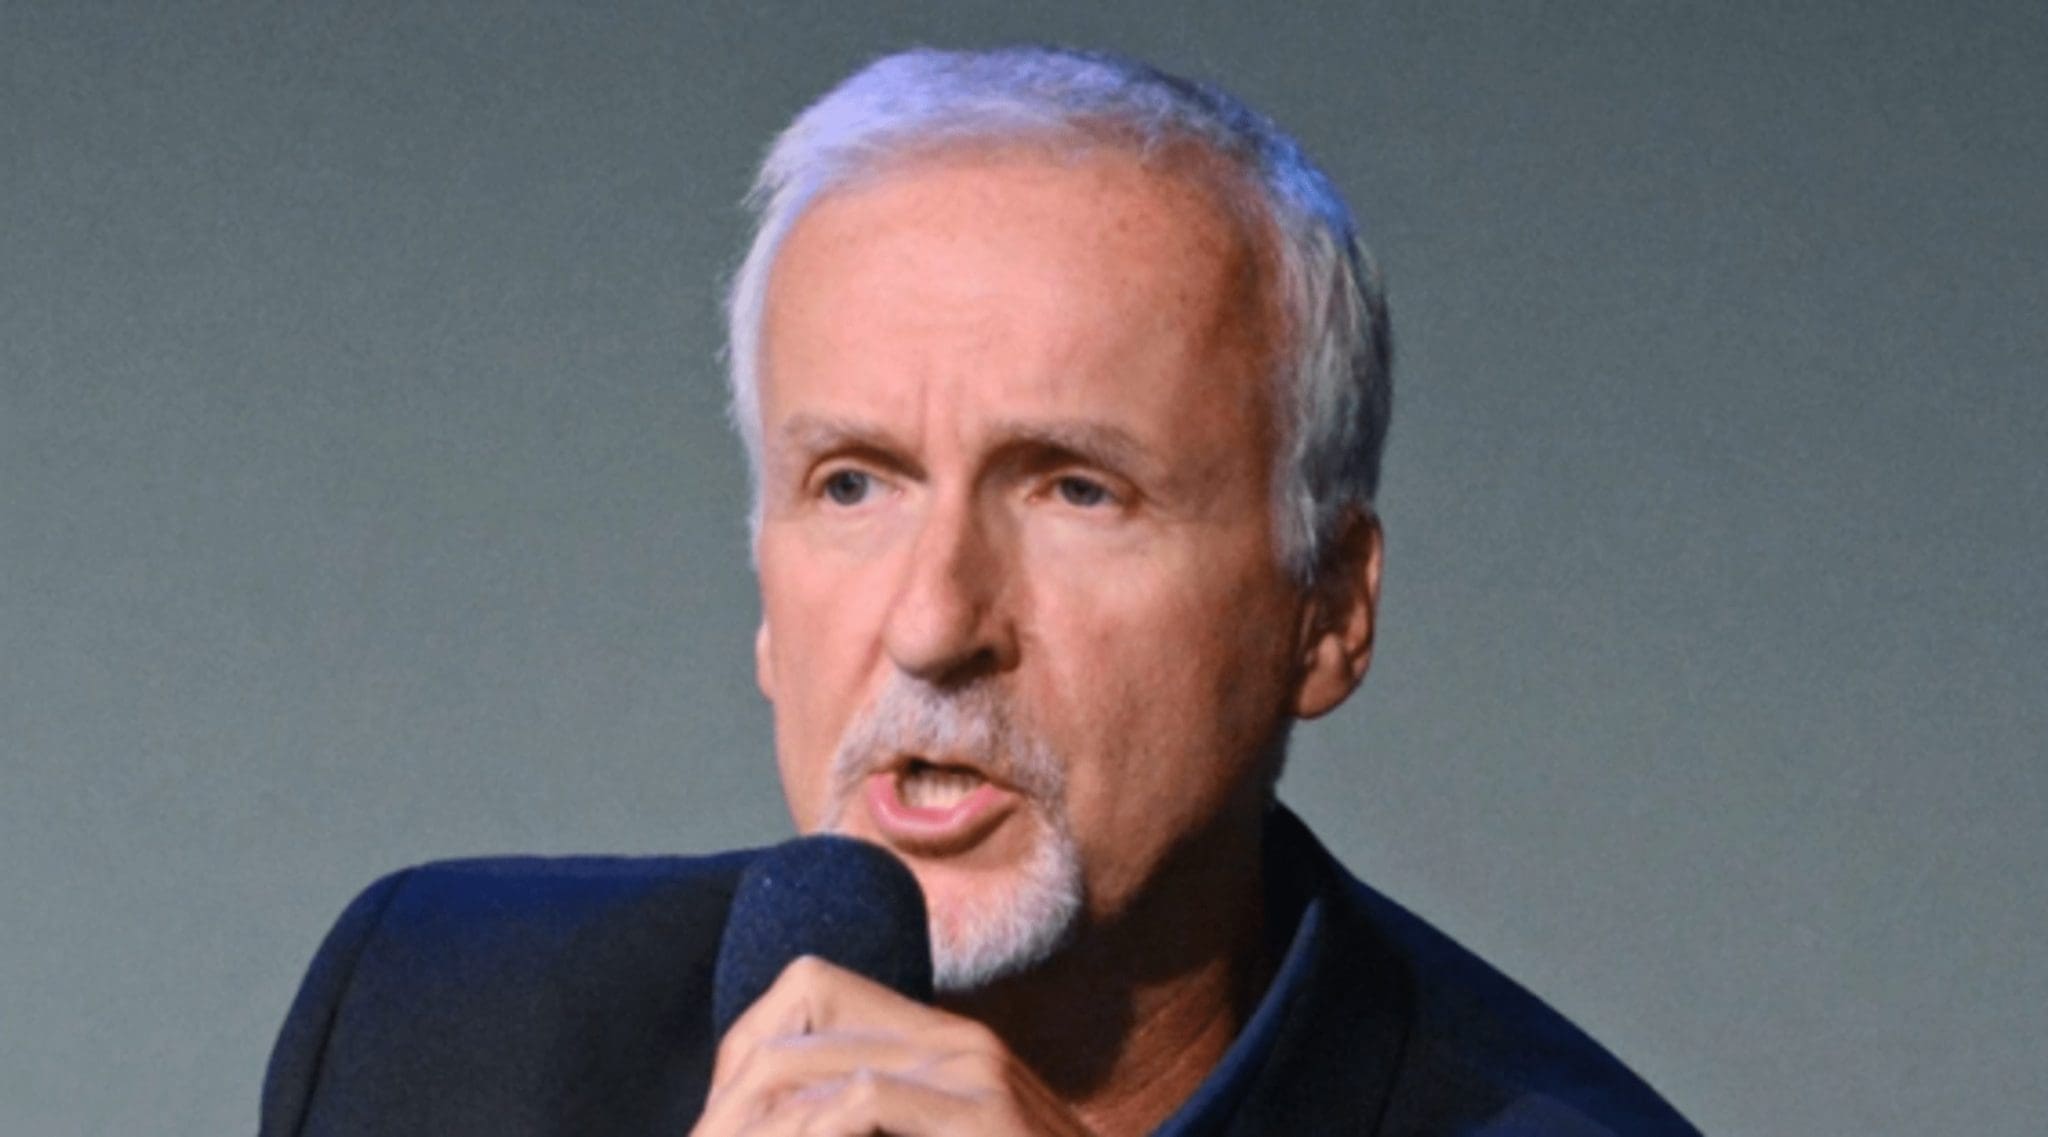 James Cameron may step down as director of the latest Avatars